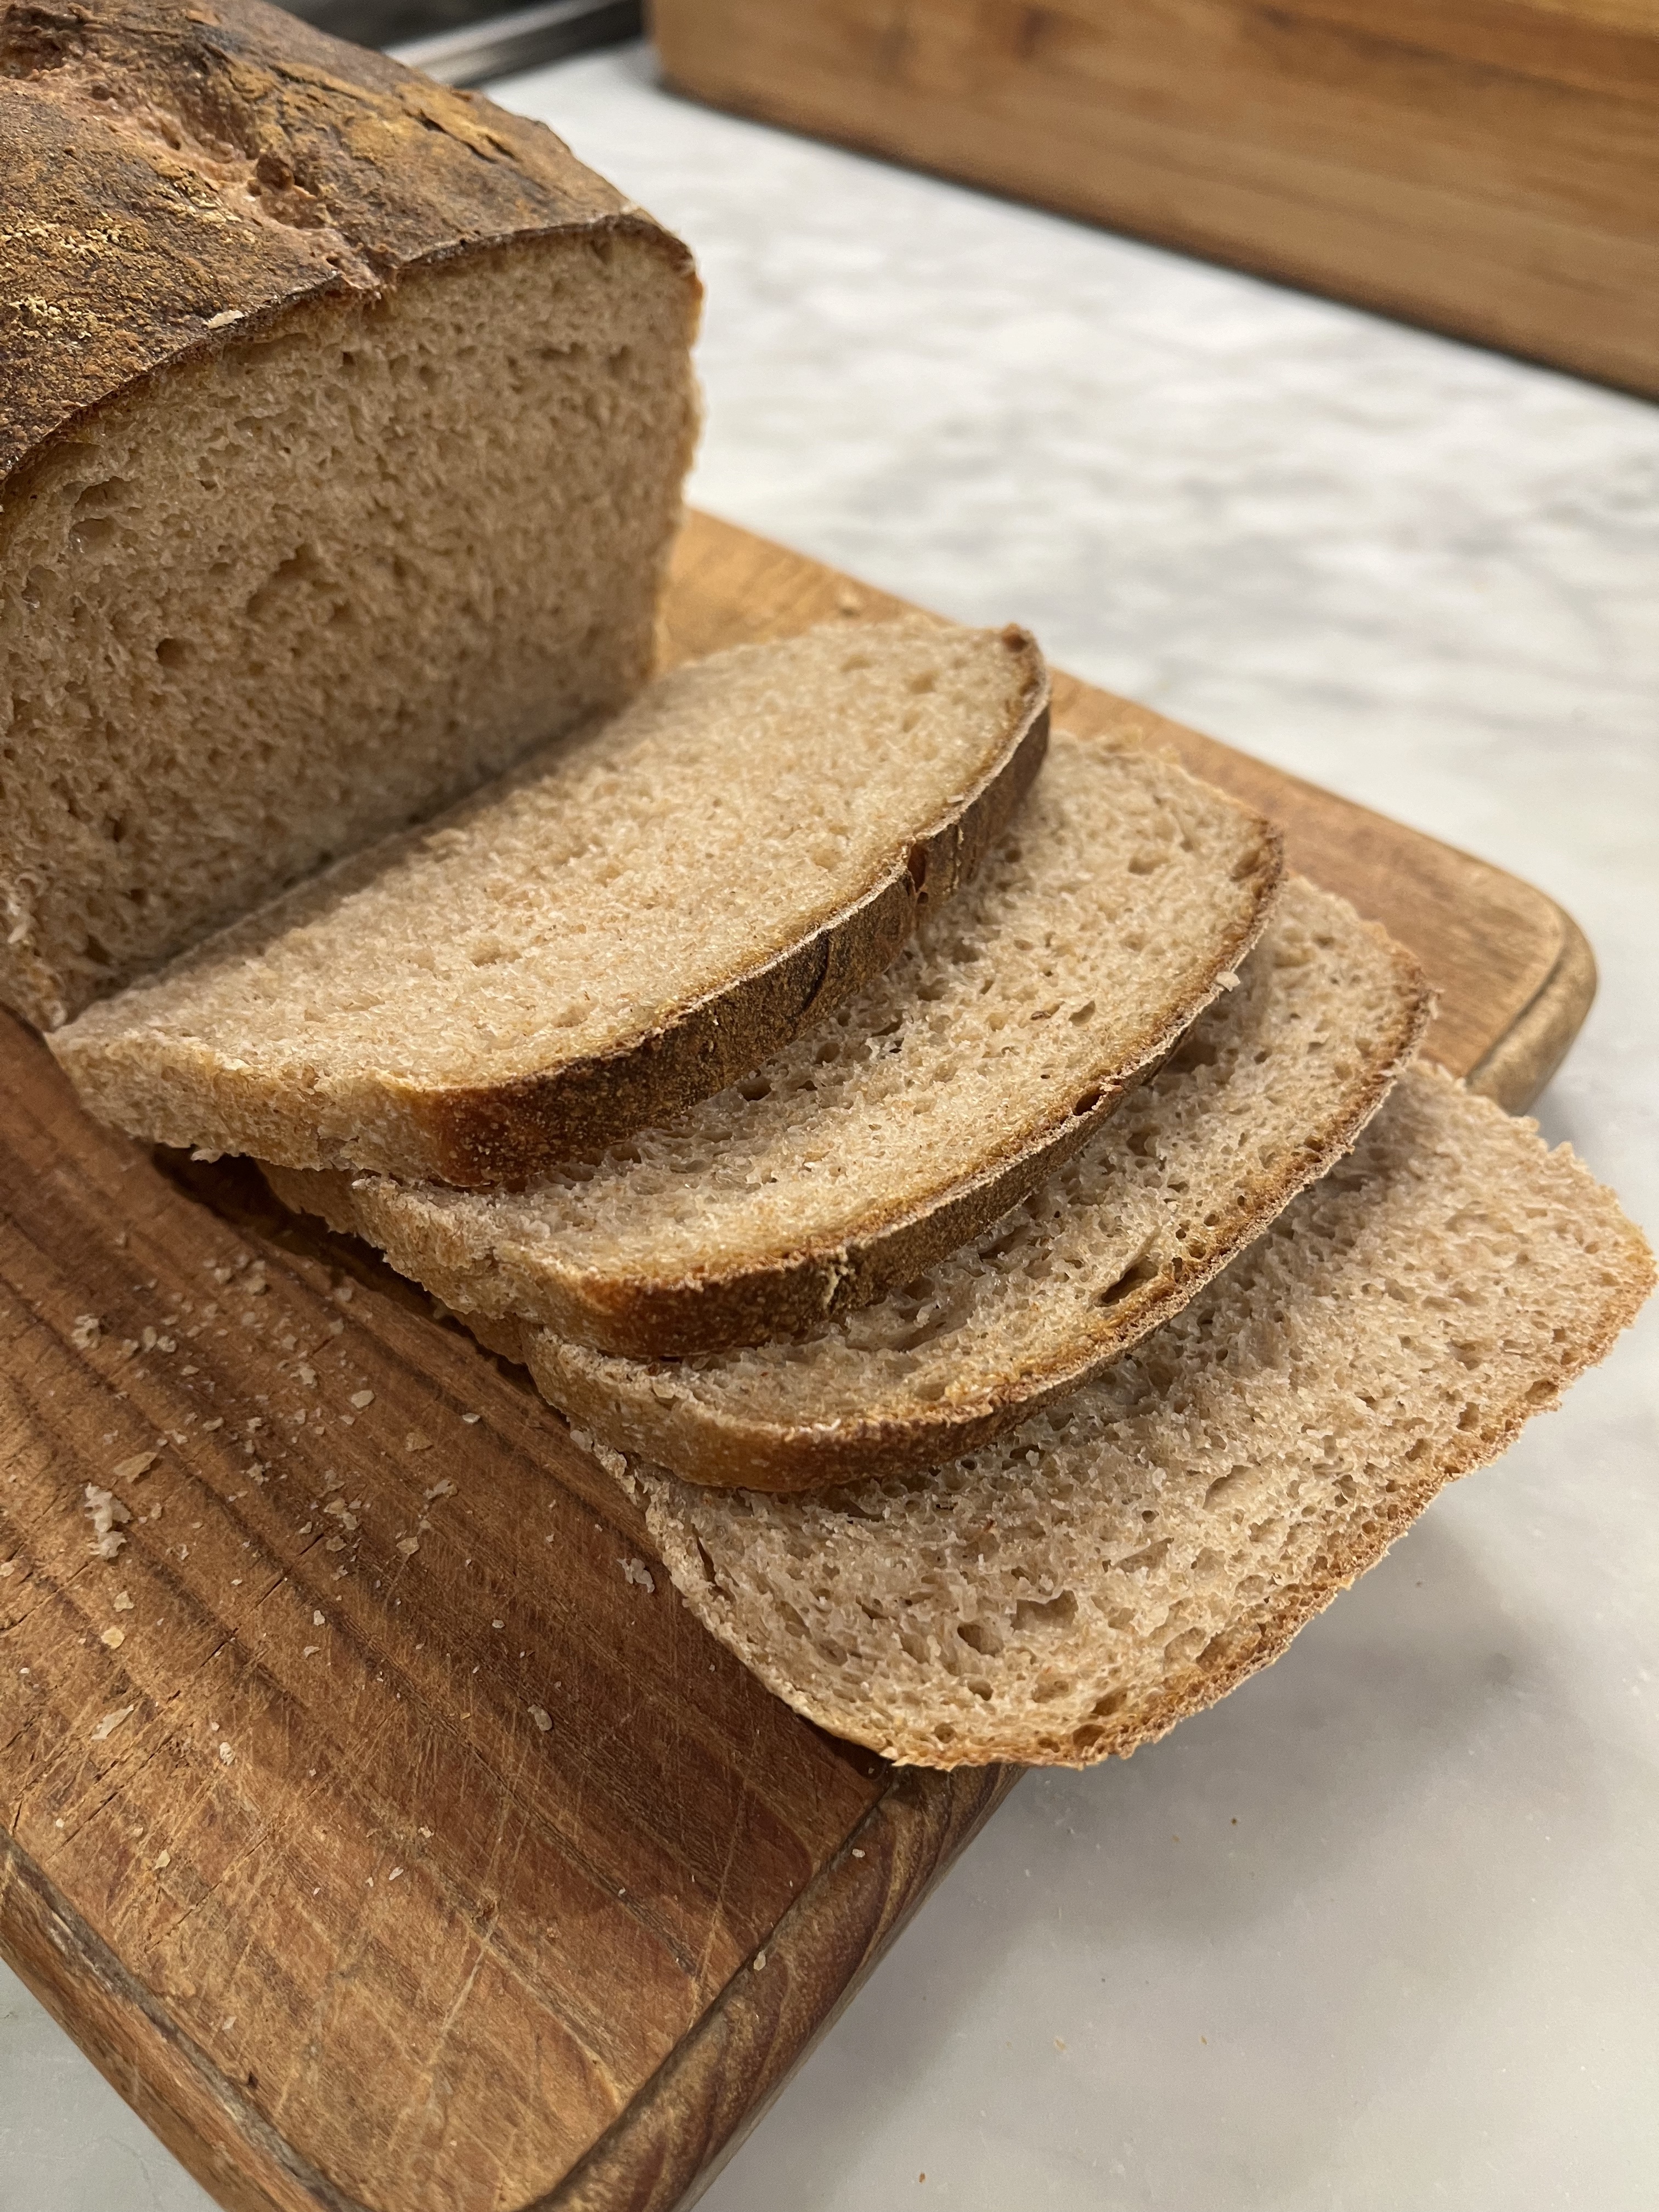 Photo of whole wheat sourdough sandwich bread partially sliced on a wood cutting board.